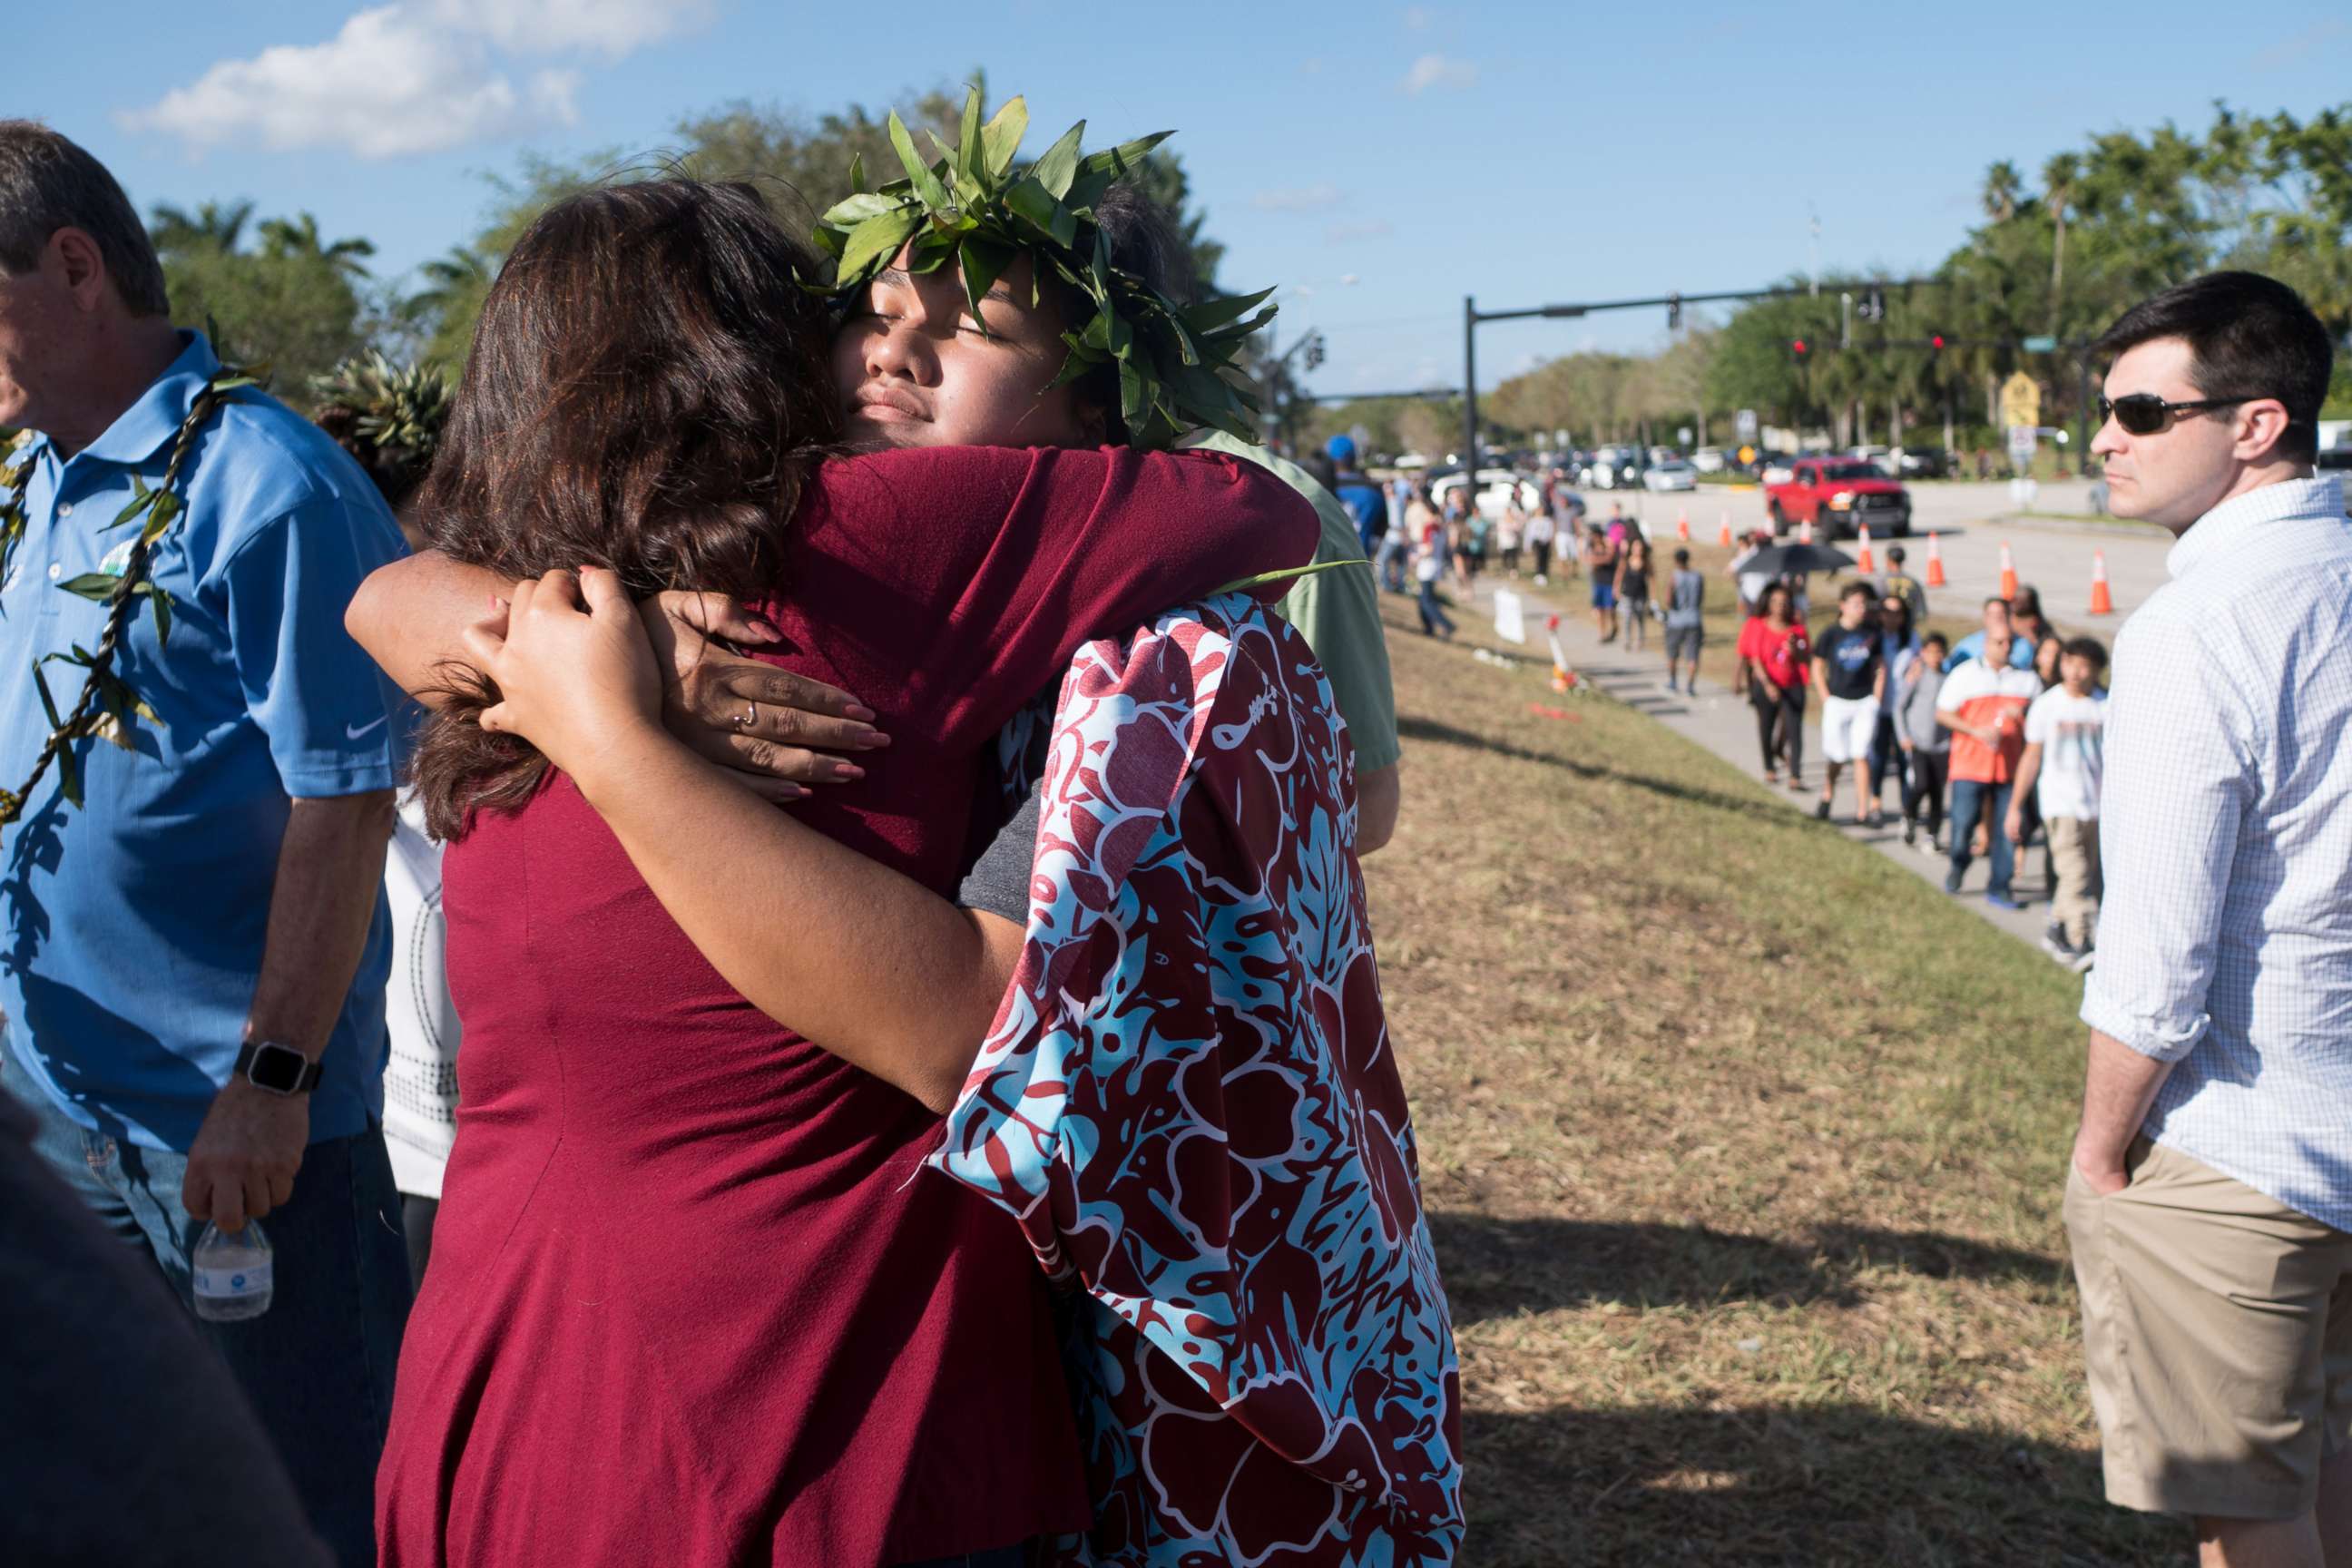 PHOTO: People embrace as students and parents arrive for voluntary campus orientation at the Marjory Stoneman Douglas High School, for the coming Wednesday's reopening, following last week's mass shooting in Parkland, Fla., Feb. 25, 2018.